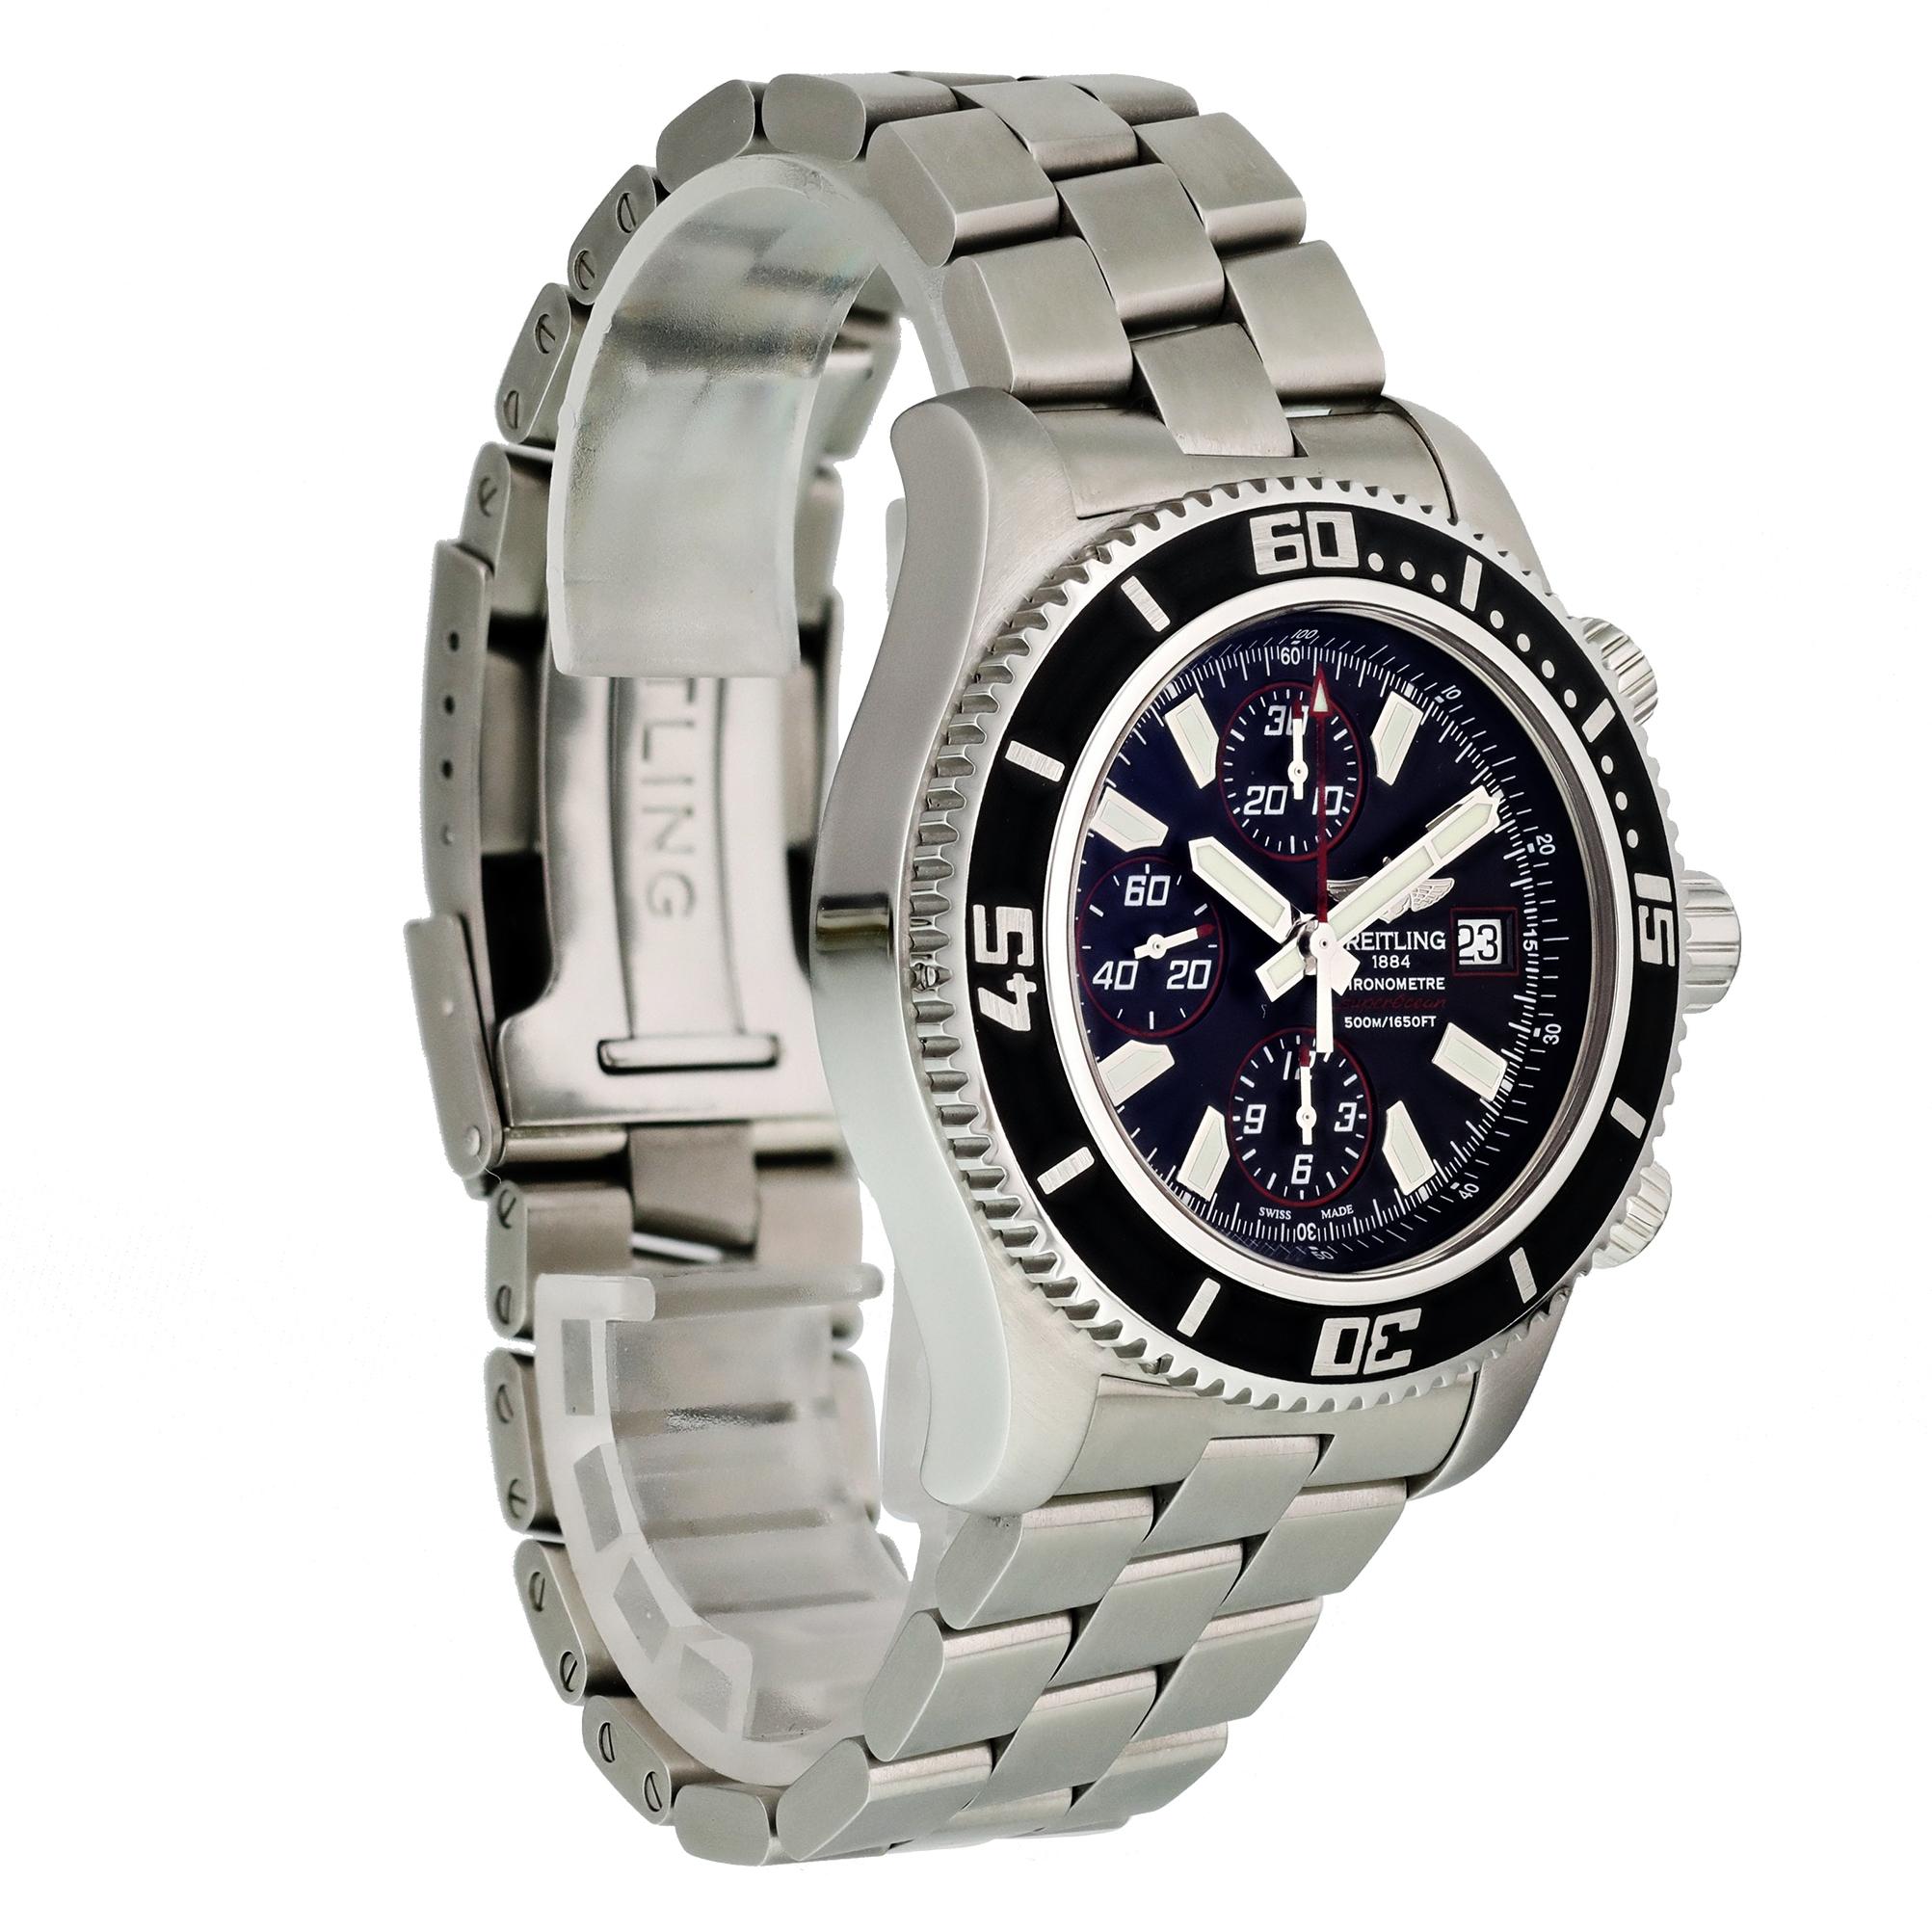 Breitling SuperOcean A13341 Chronograph Men’s Watch In Excellent Condition For Sale In New York, NY